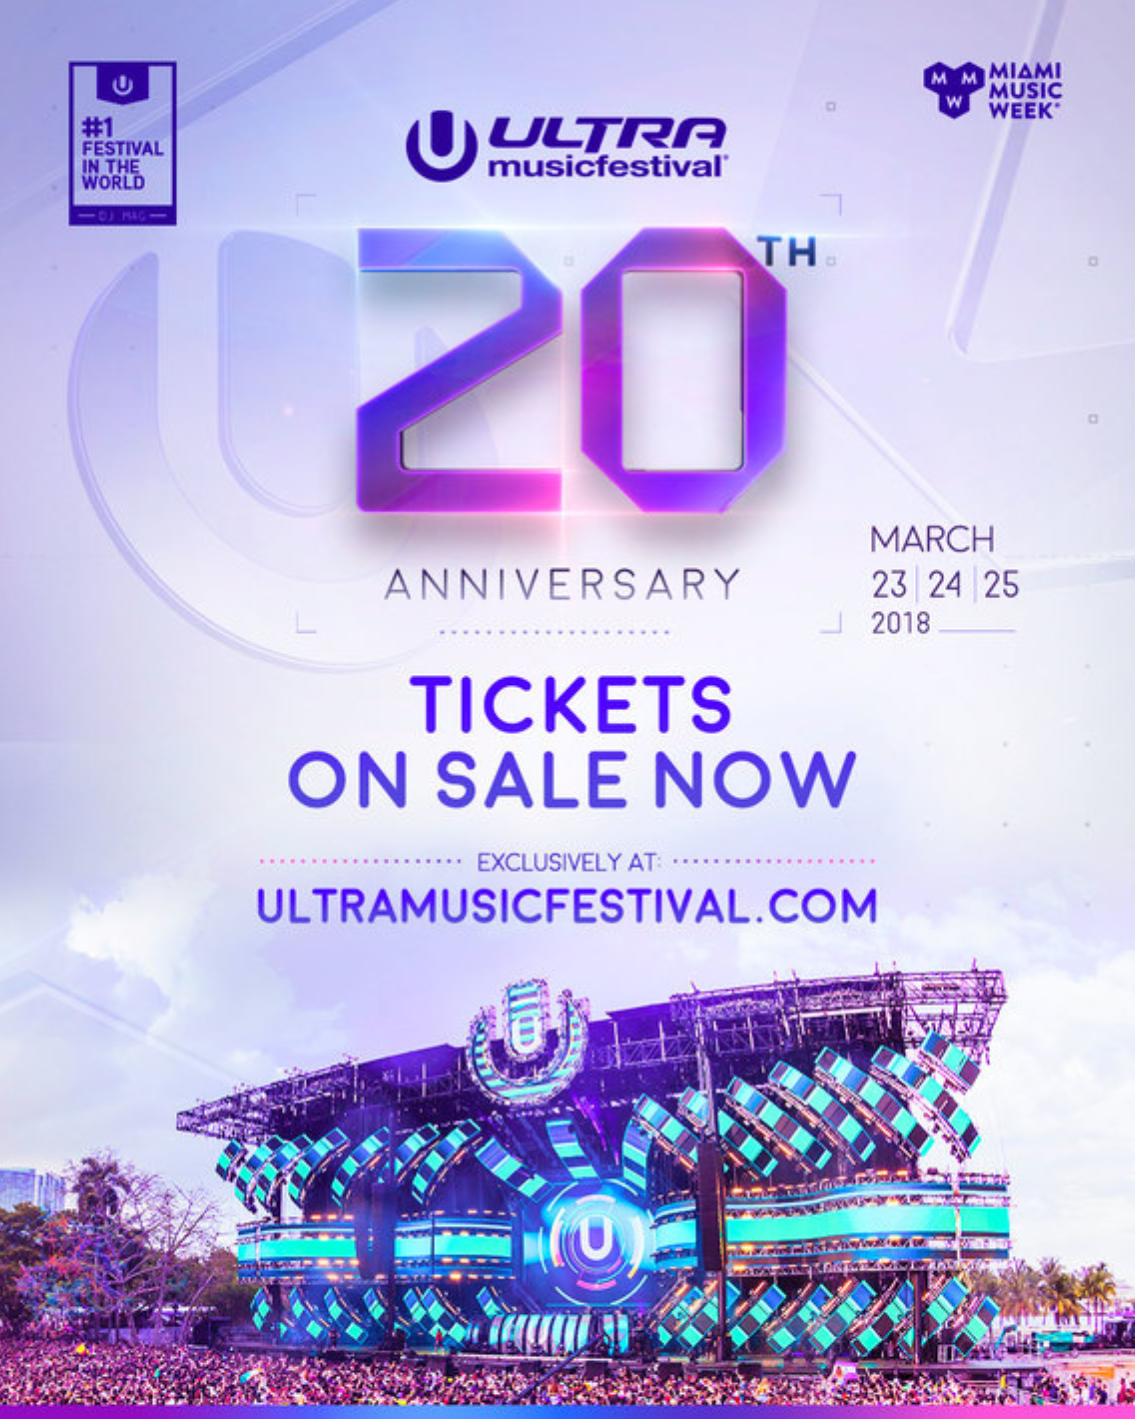 ULTRA MUSIC FESTIVAL 20TH ANNIVERSARY TICKETS ON SALE NOW Beat Night MX